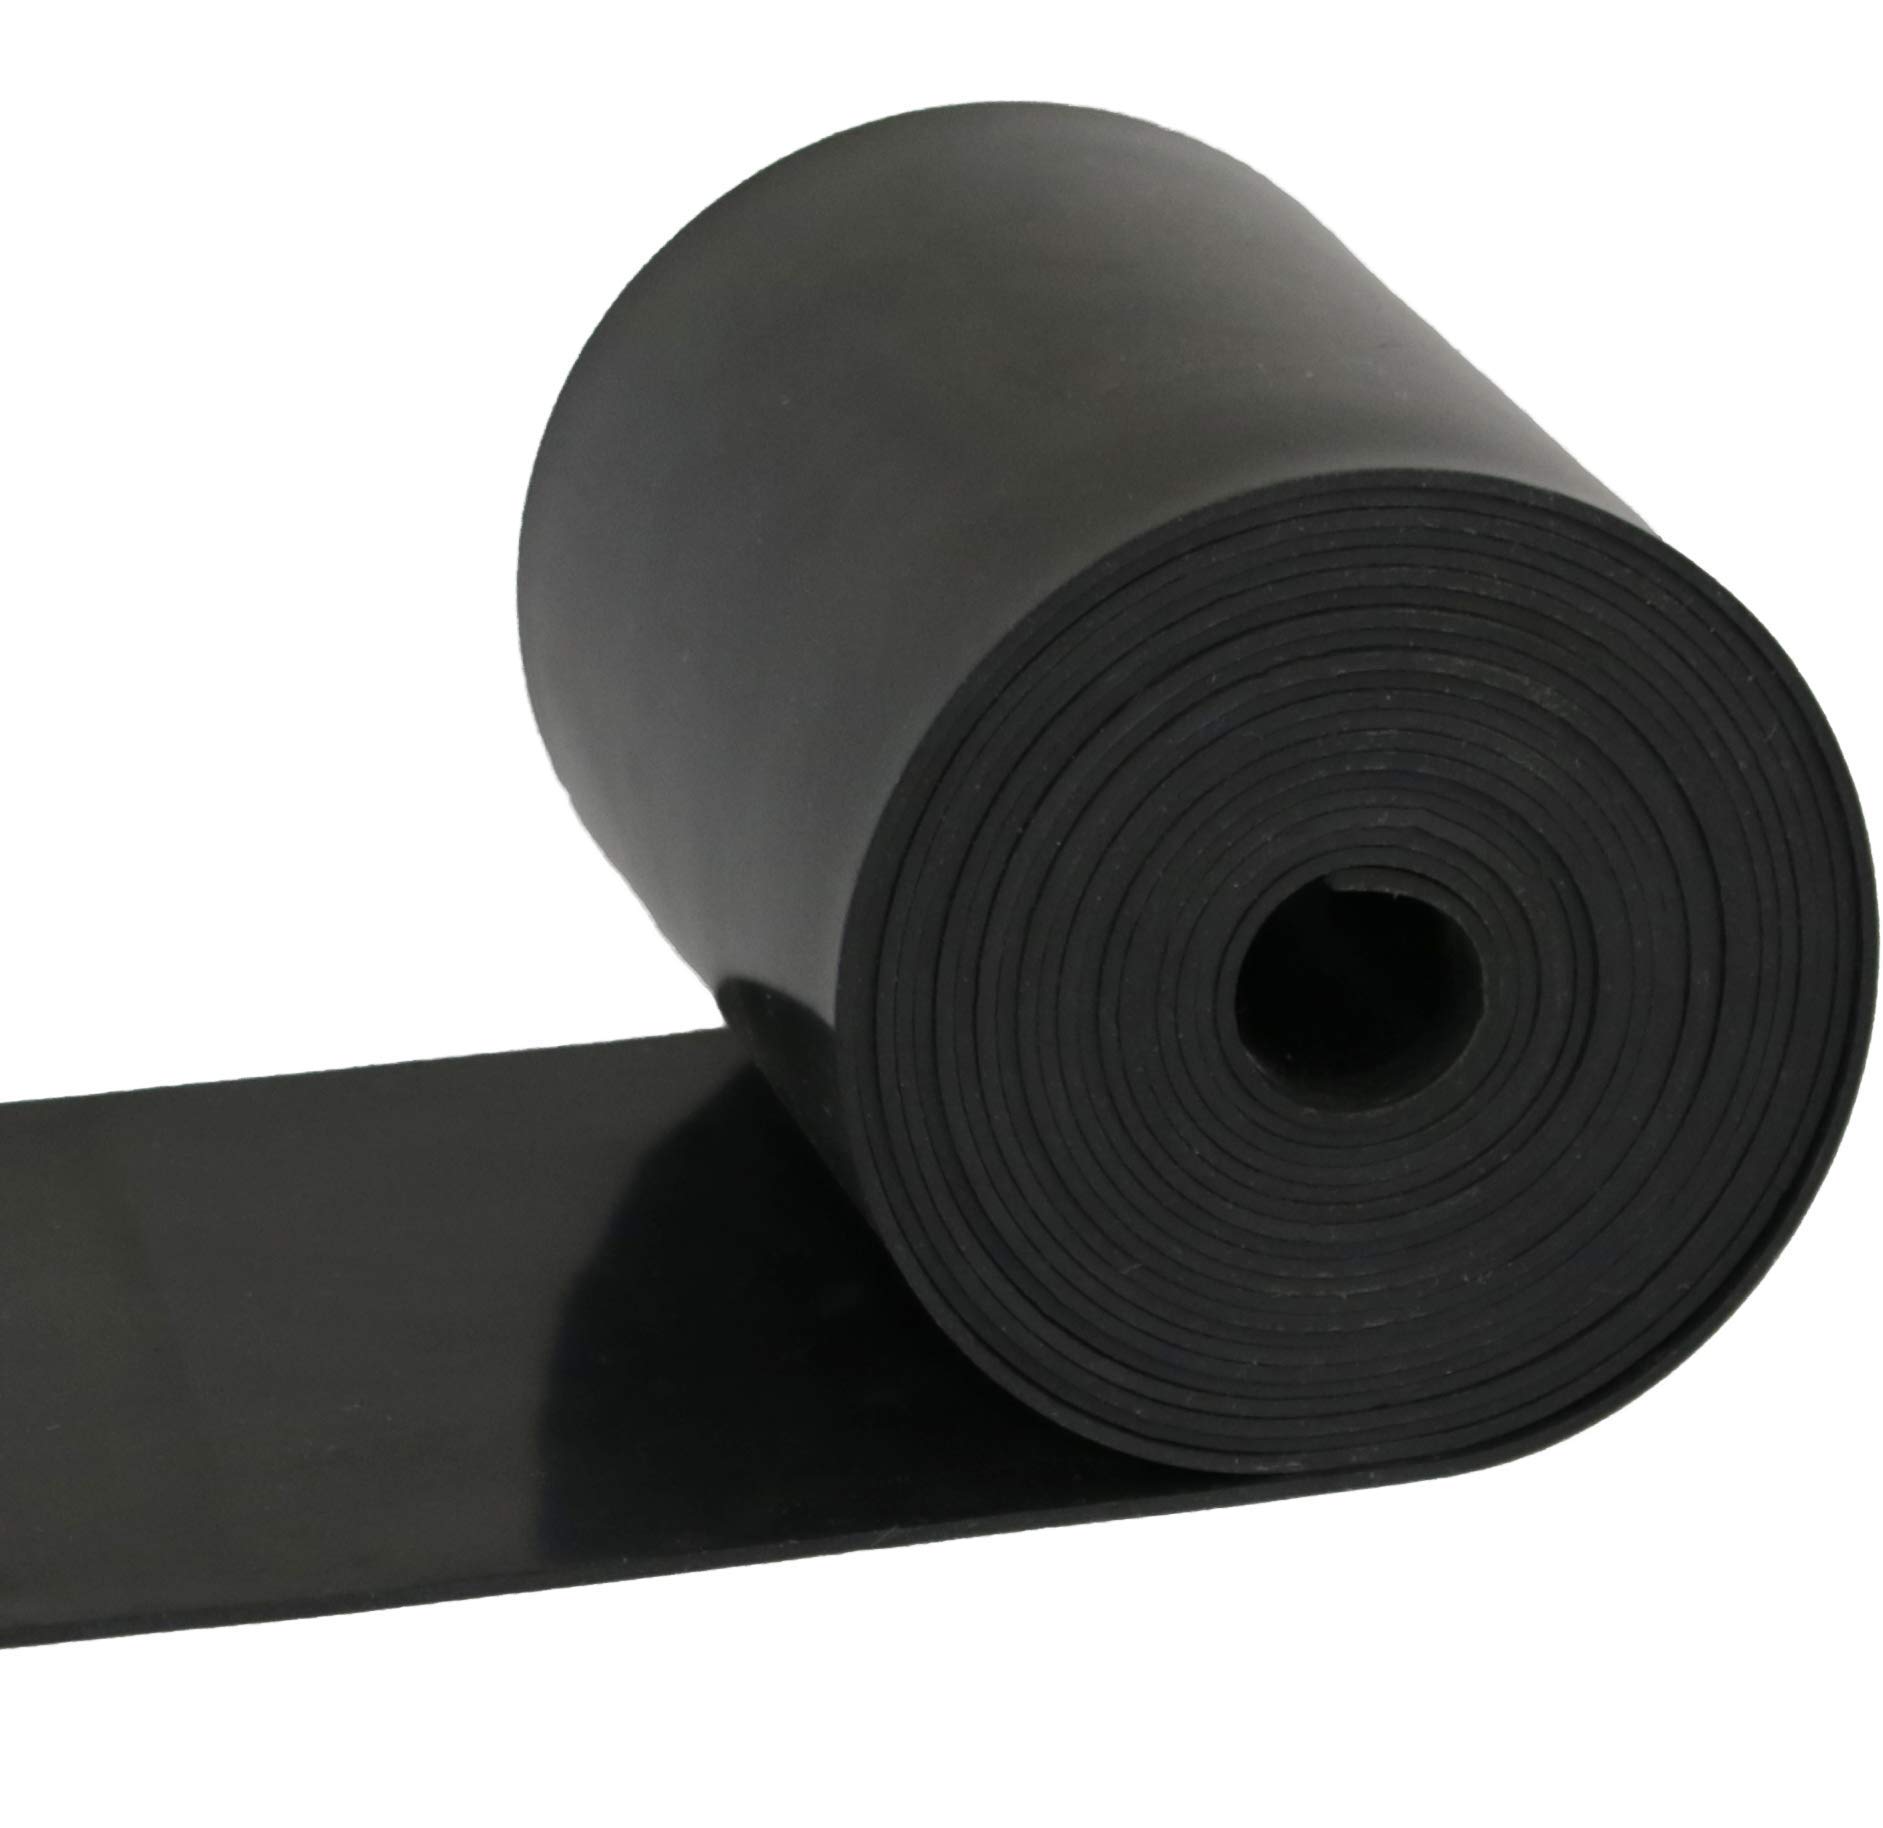 NABOWAN Solid Rubber Sheets,Strips,Rolls 1/16" (.062") Thick x 4" Wide x 120" Long, Thin Neoprene Rubber, Perfect for DIY Gasket